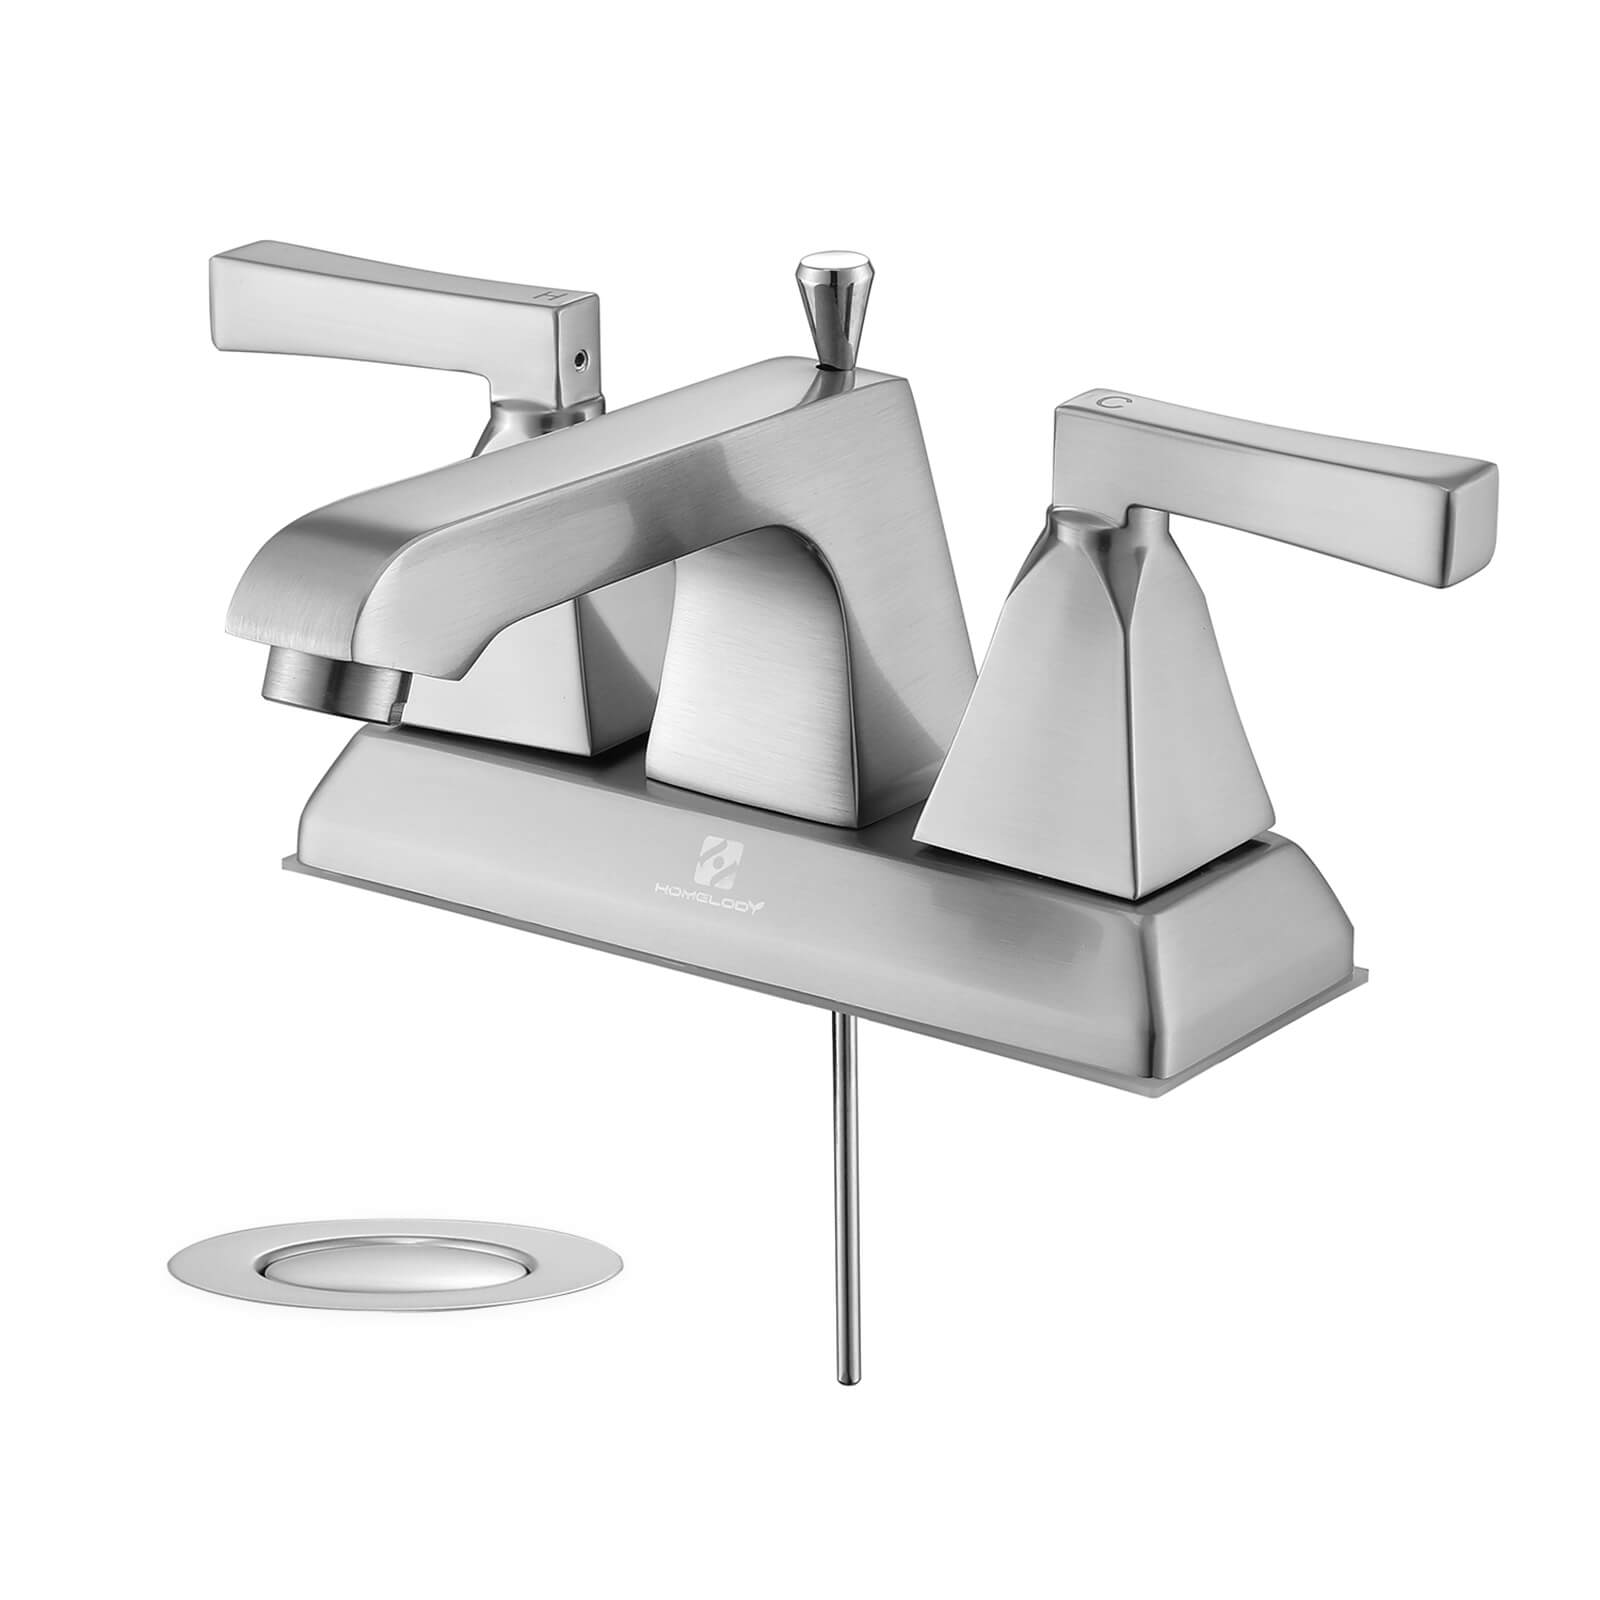 HOMELODY 4 Inch 2 Handle Sink Faucet